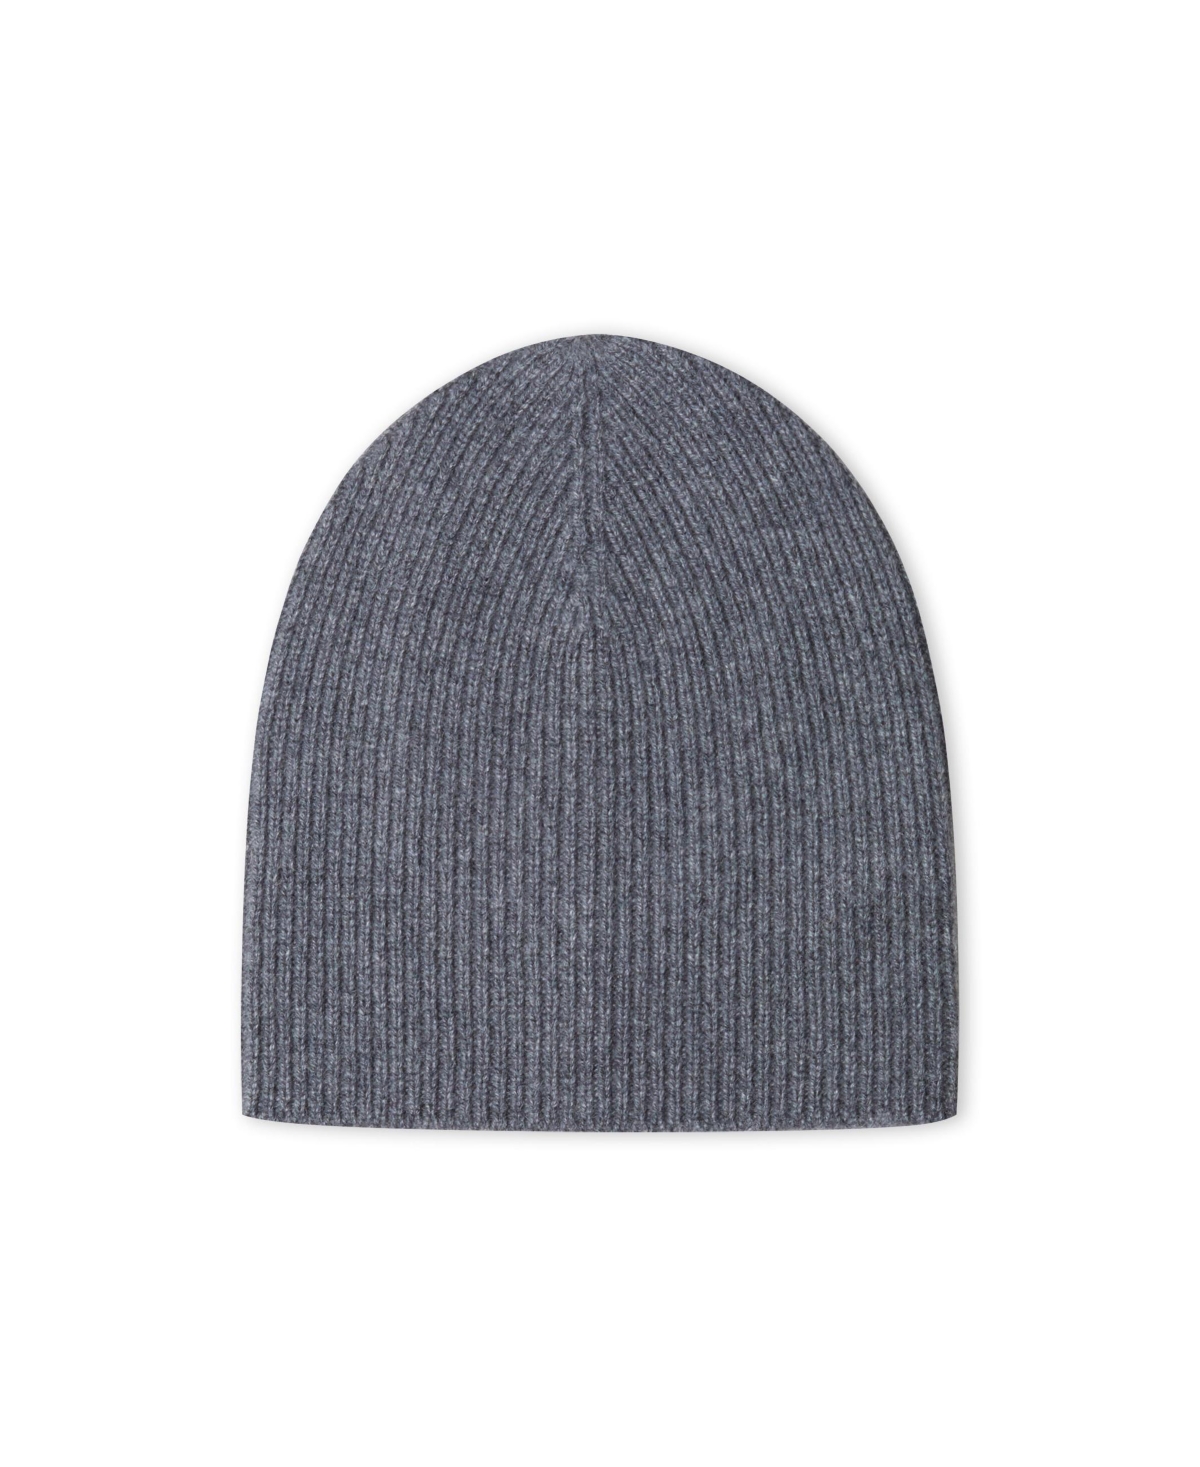 Men's Men's Ribbed Beanie, 100% Cashmere, Soft & Stretchy, Warm Hat for Winter - Gray